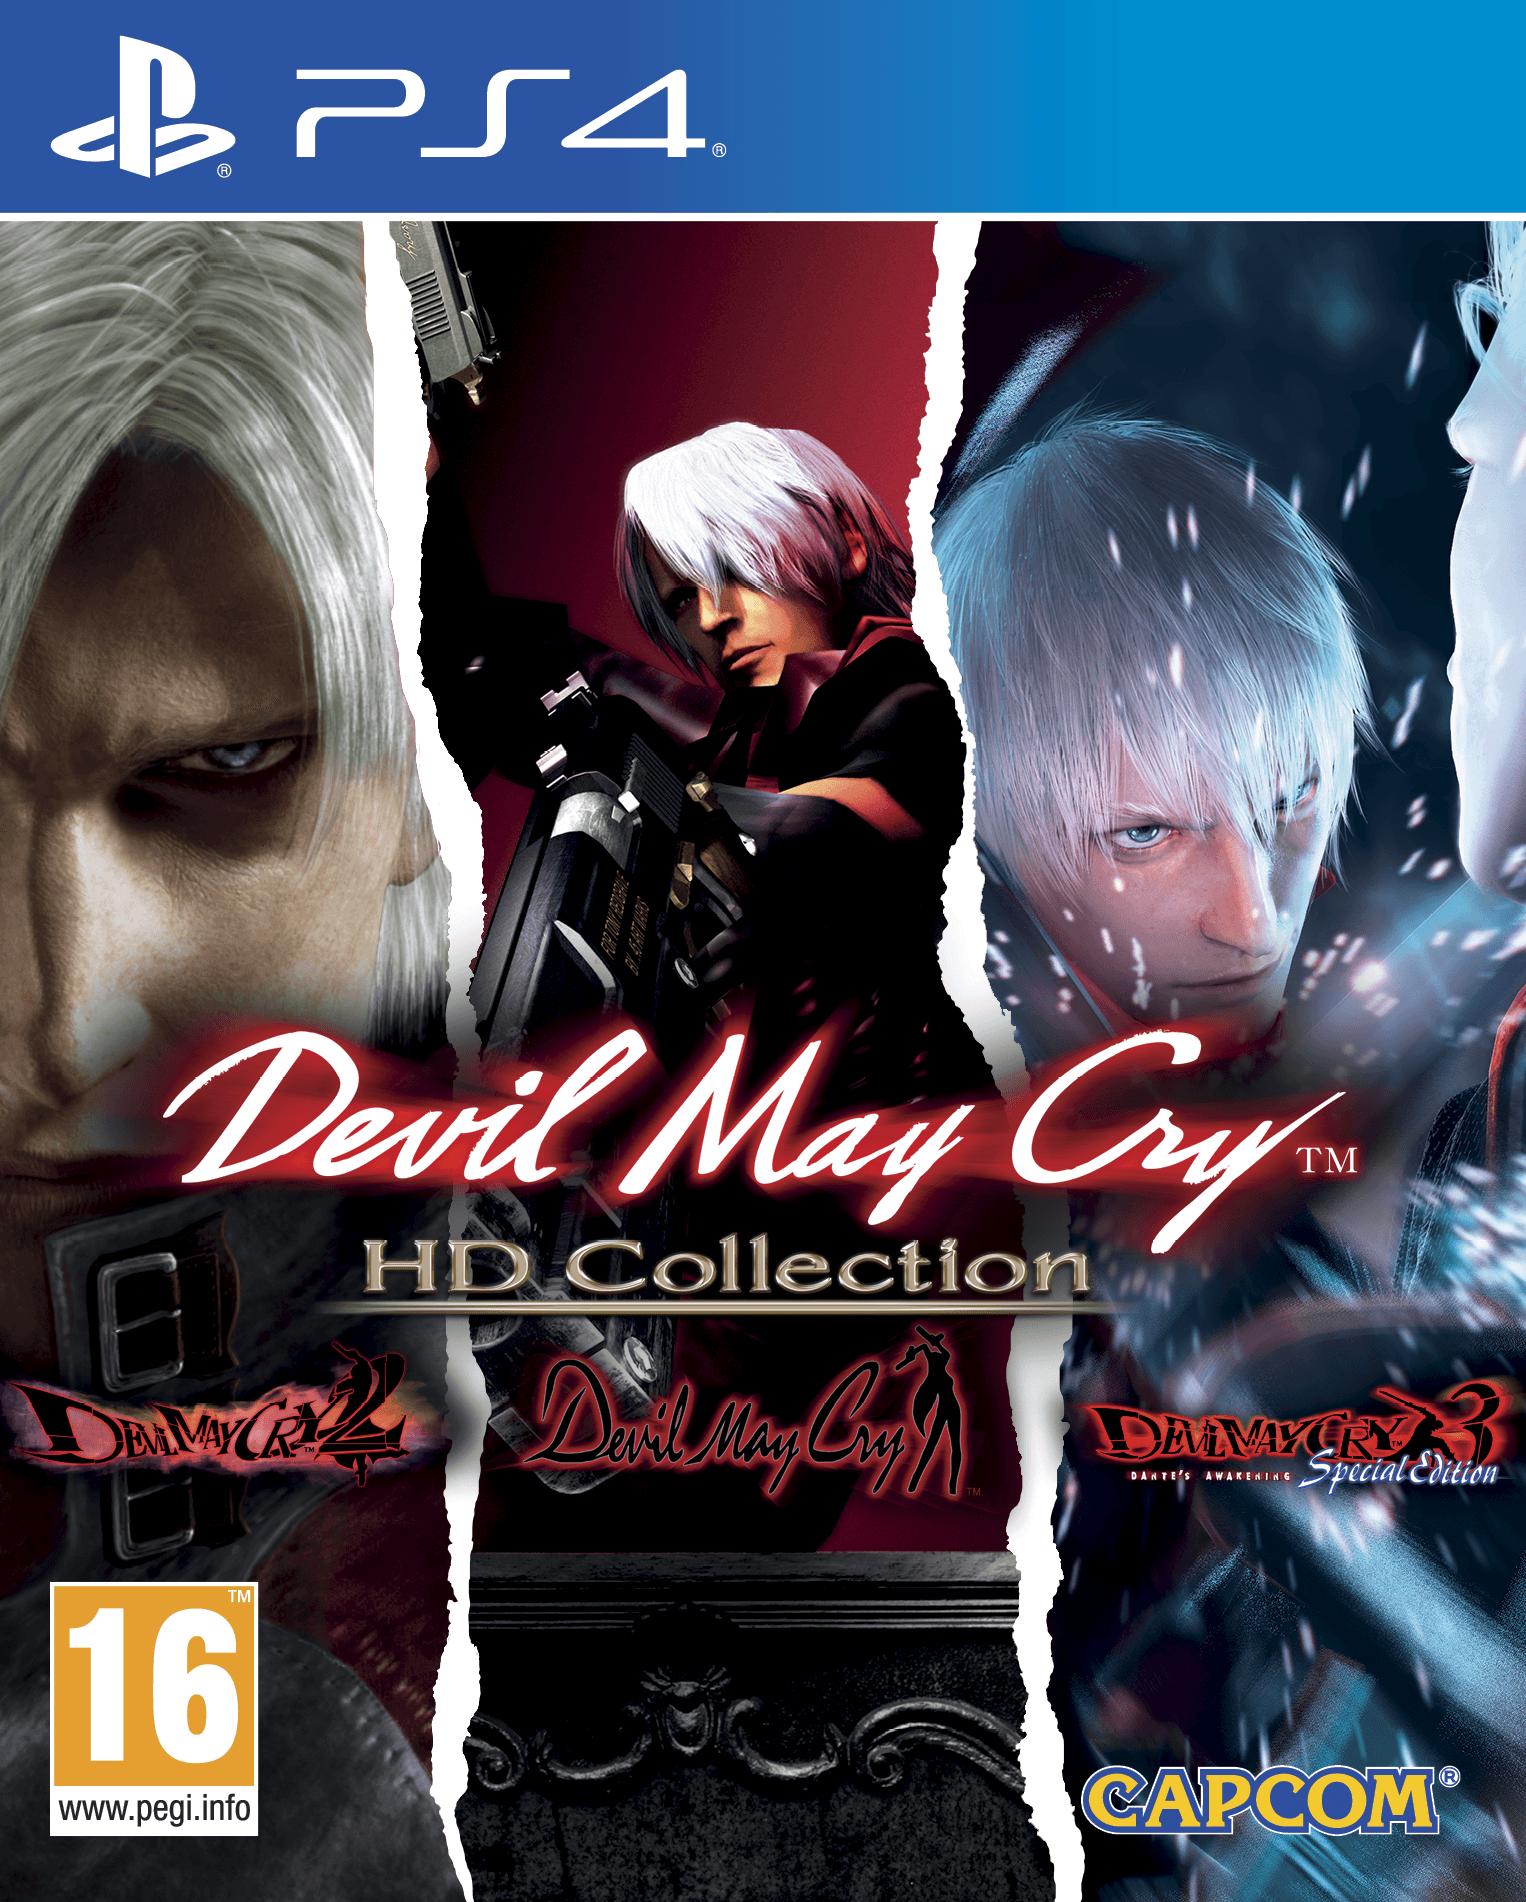 Devil May Cry Hd Collection - Want a New Gadget